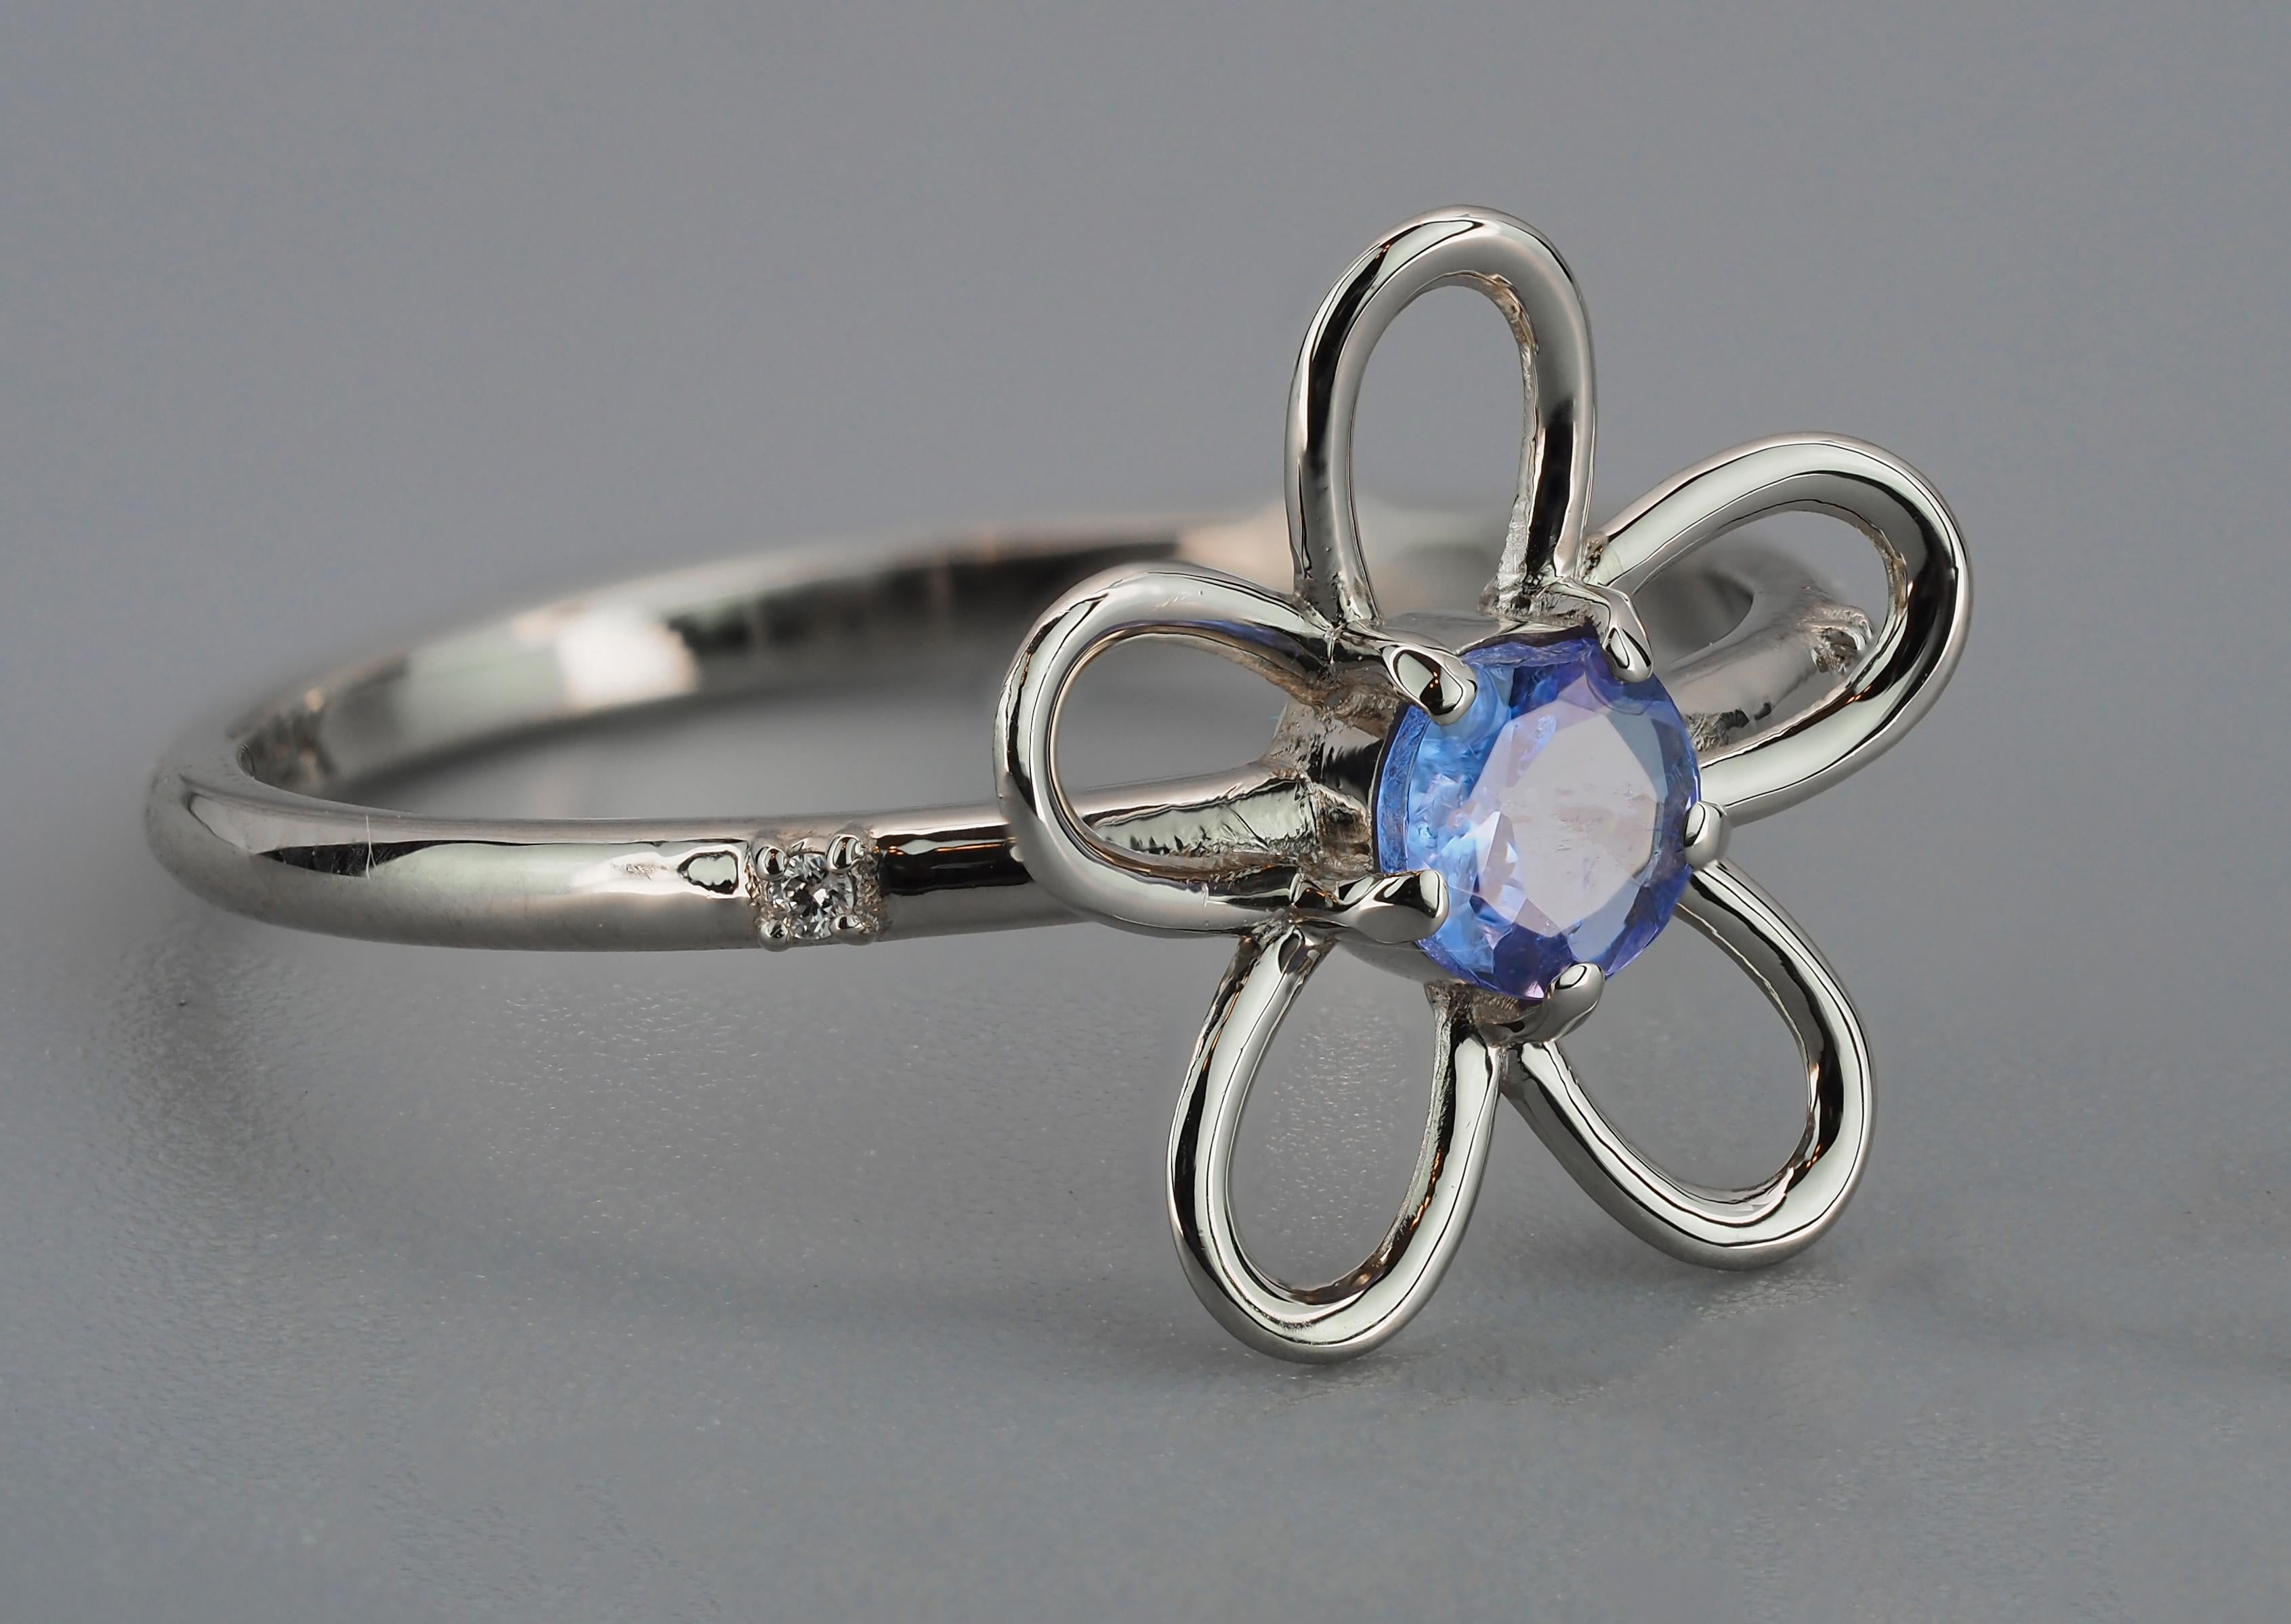 For Sale:  14k Gold Flower Ring with Tanzanite and Diamonds 2